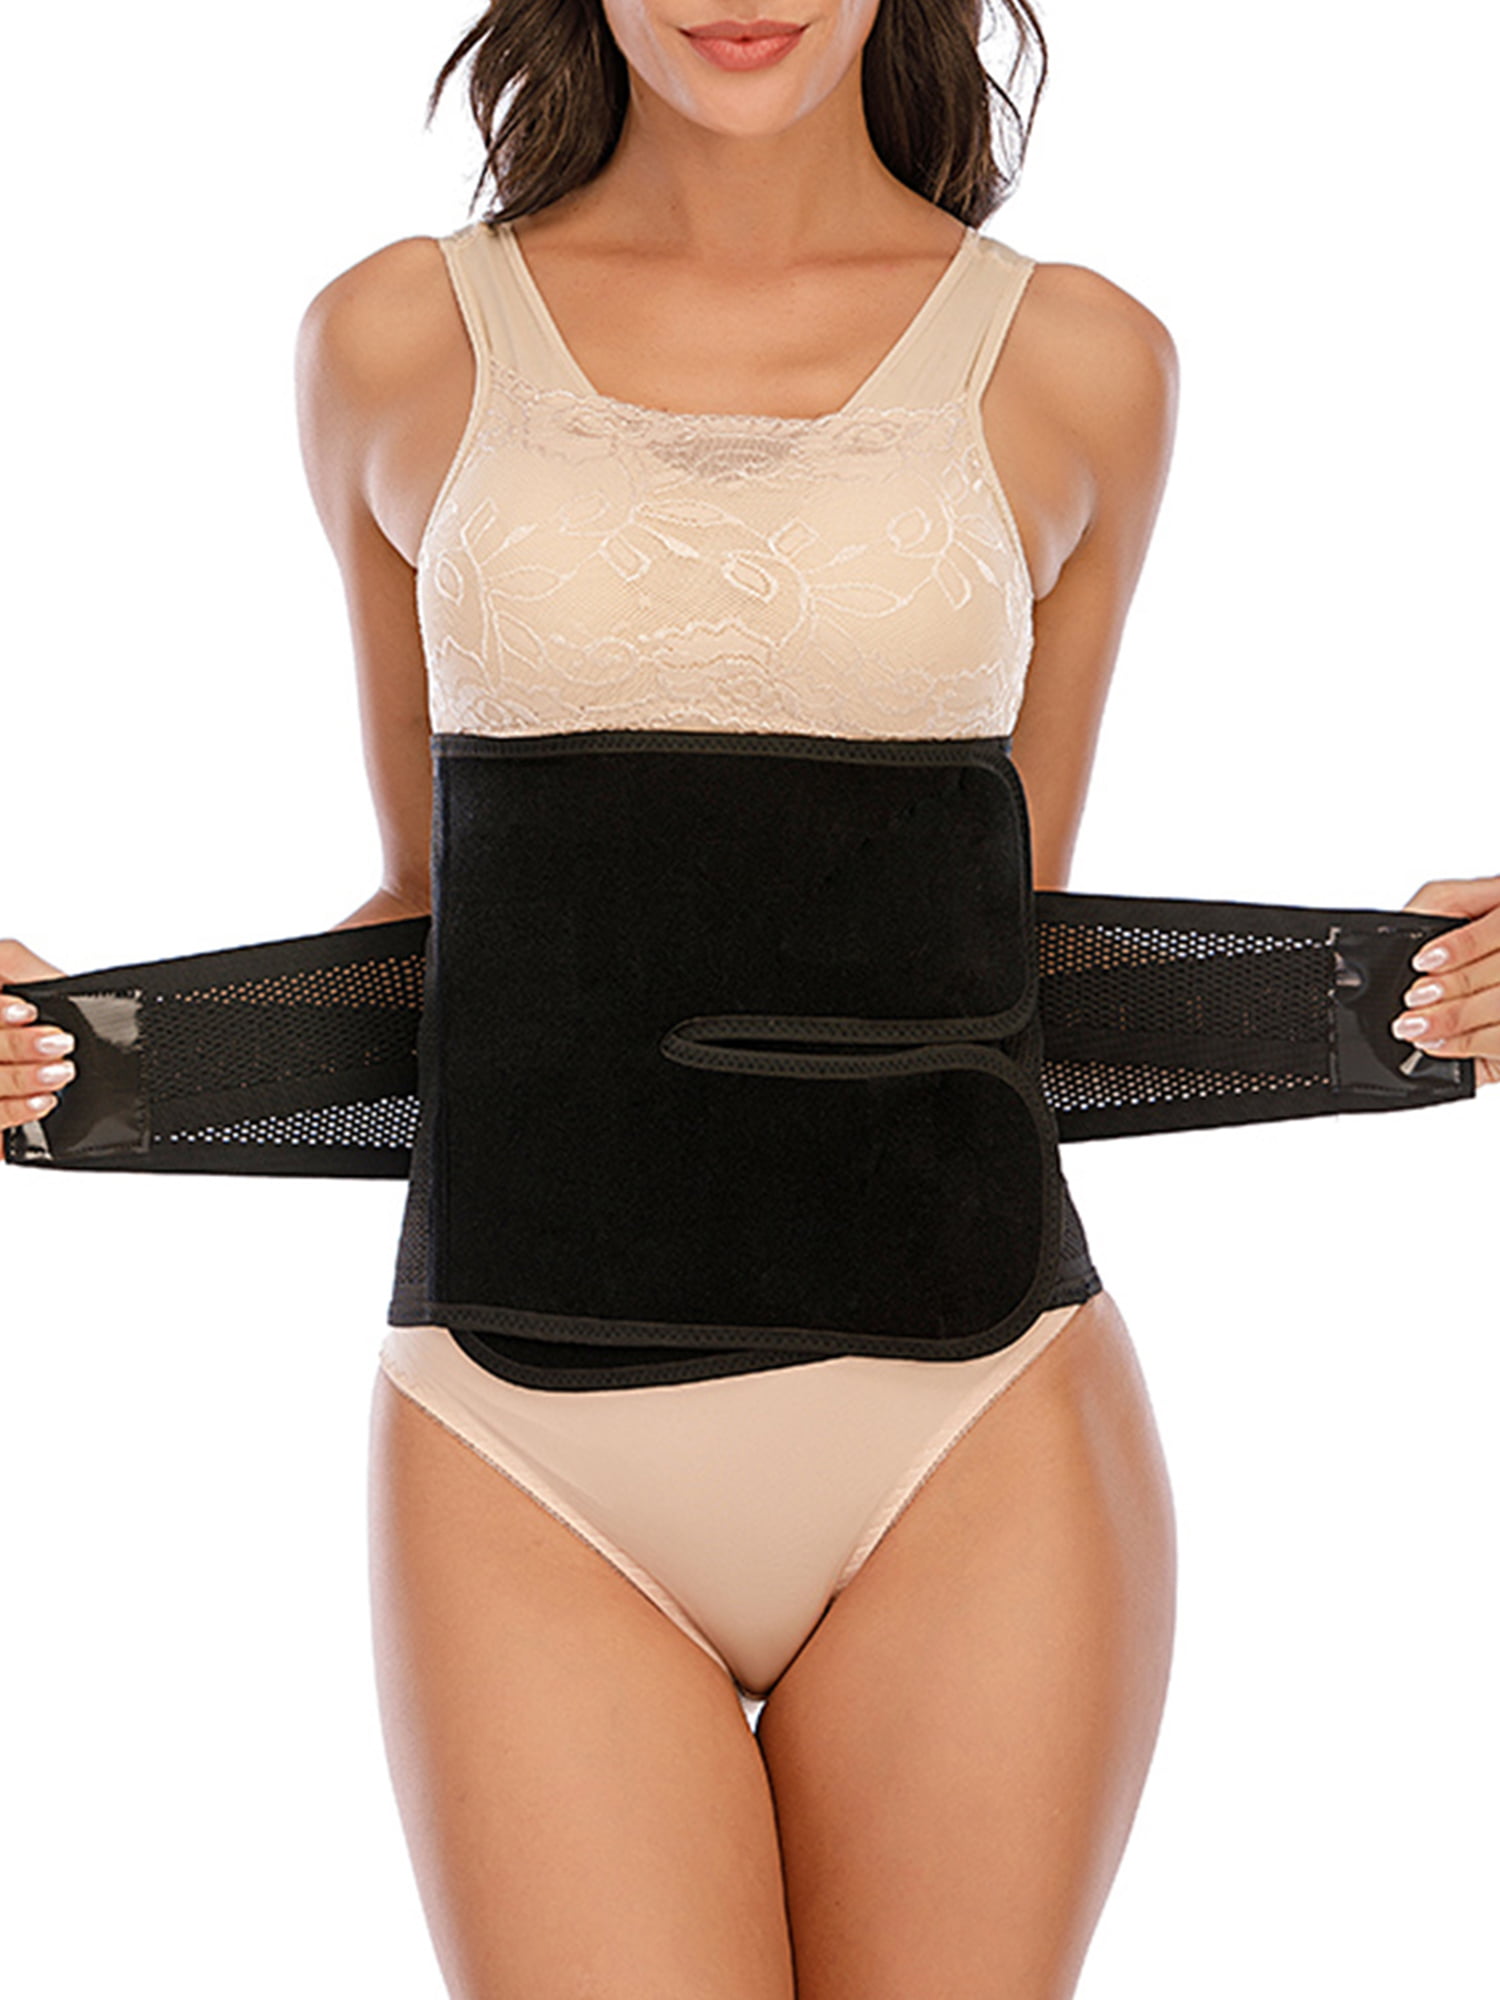 Size S Exceart Women Belly Reocvery Wrap Abdominal Support Girdle Belt Waist Slimming Belt Postpartum After Pregnancy Belly Band for Women